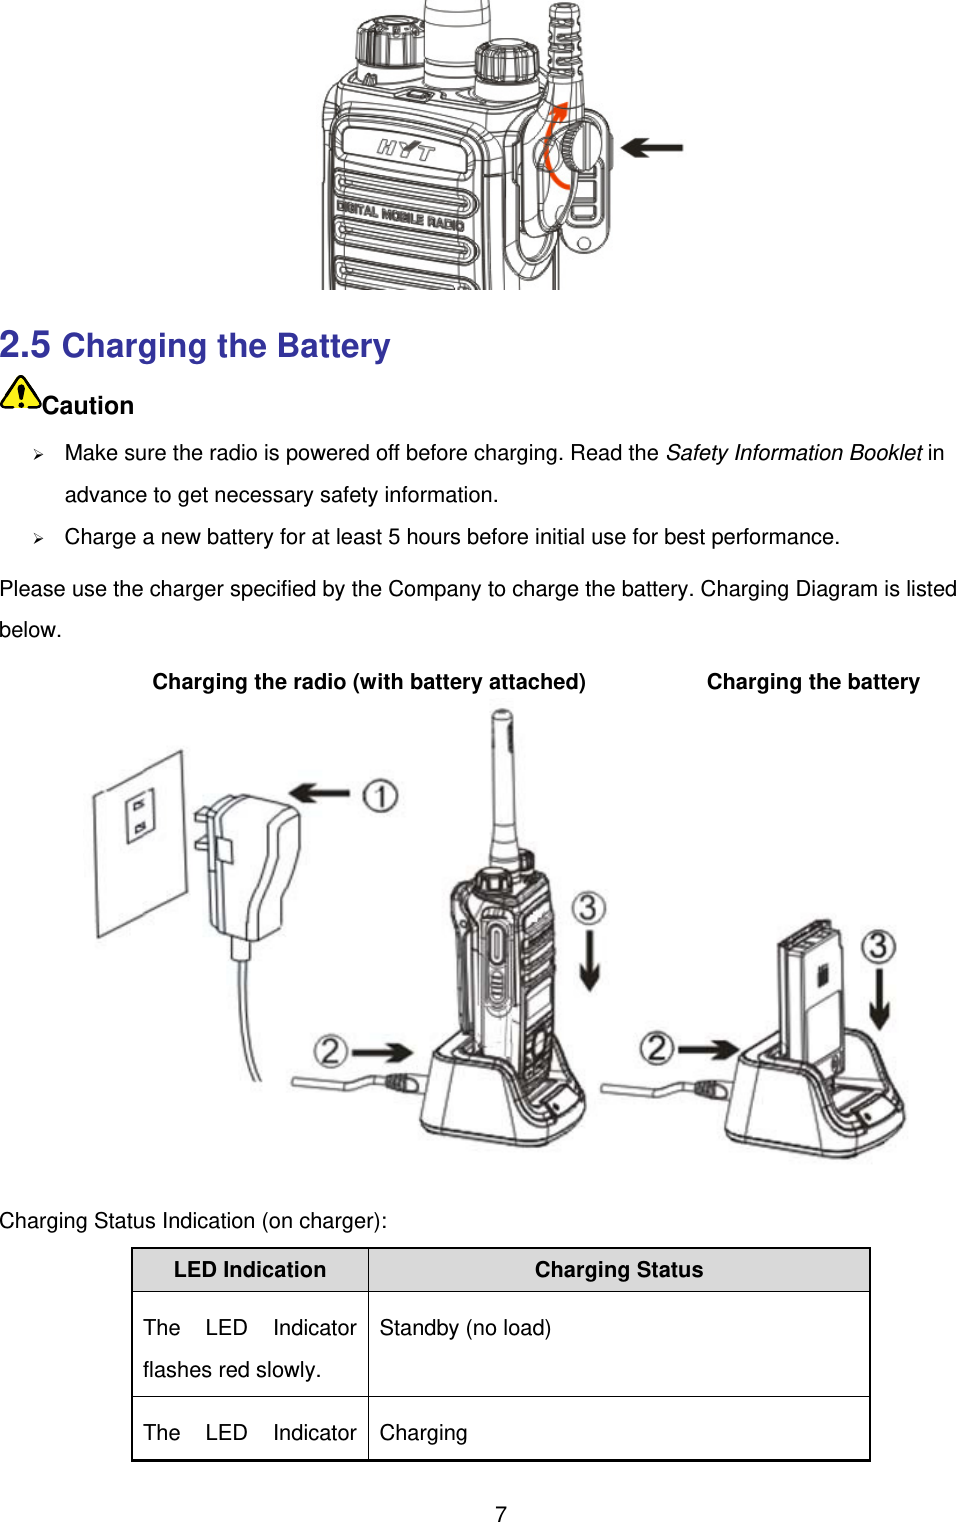  7  2.5 Charging the Battery Caution  Make sure the radio is powered off before charging. Read the Safety Information Booklet in advance to get necessary safety information.    Charge a new battery for at least 5 hours before initial use for best performance. Please use the charger specified by the Company to charge the battery. Charging Diagram is listed below.           Charging the radio (with battery attached)            Charging the battery  Charging Status Indication (on charger):   LED Indication  Charging Status The LED Indicator flashes red slowly.   Standby (no load) The LED Indicator Charging 